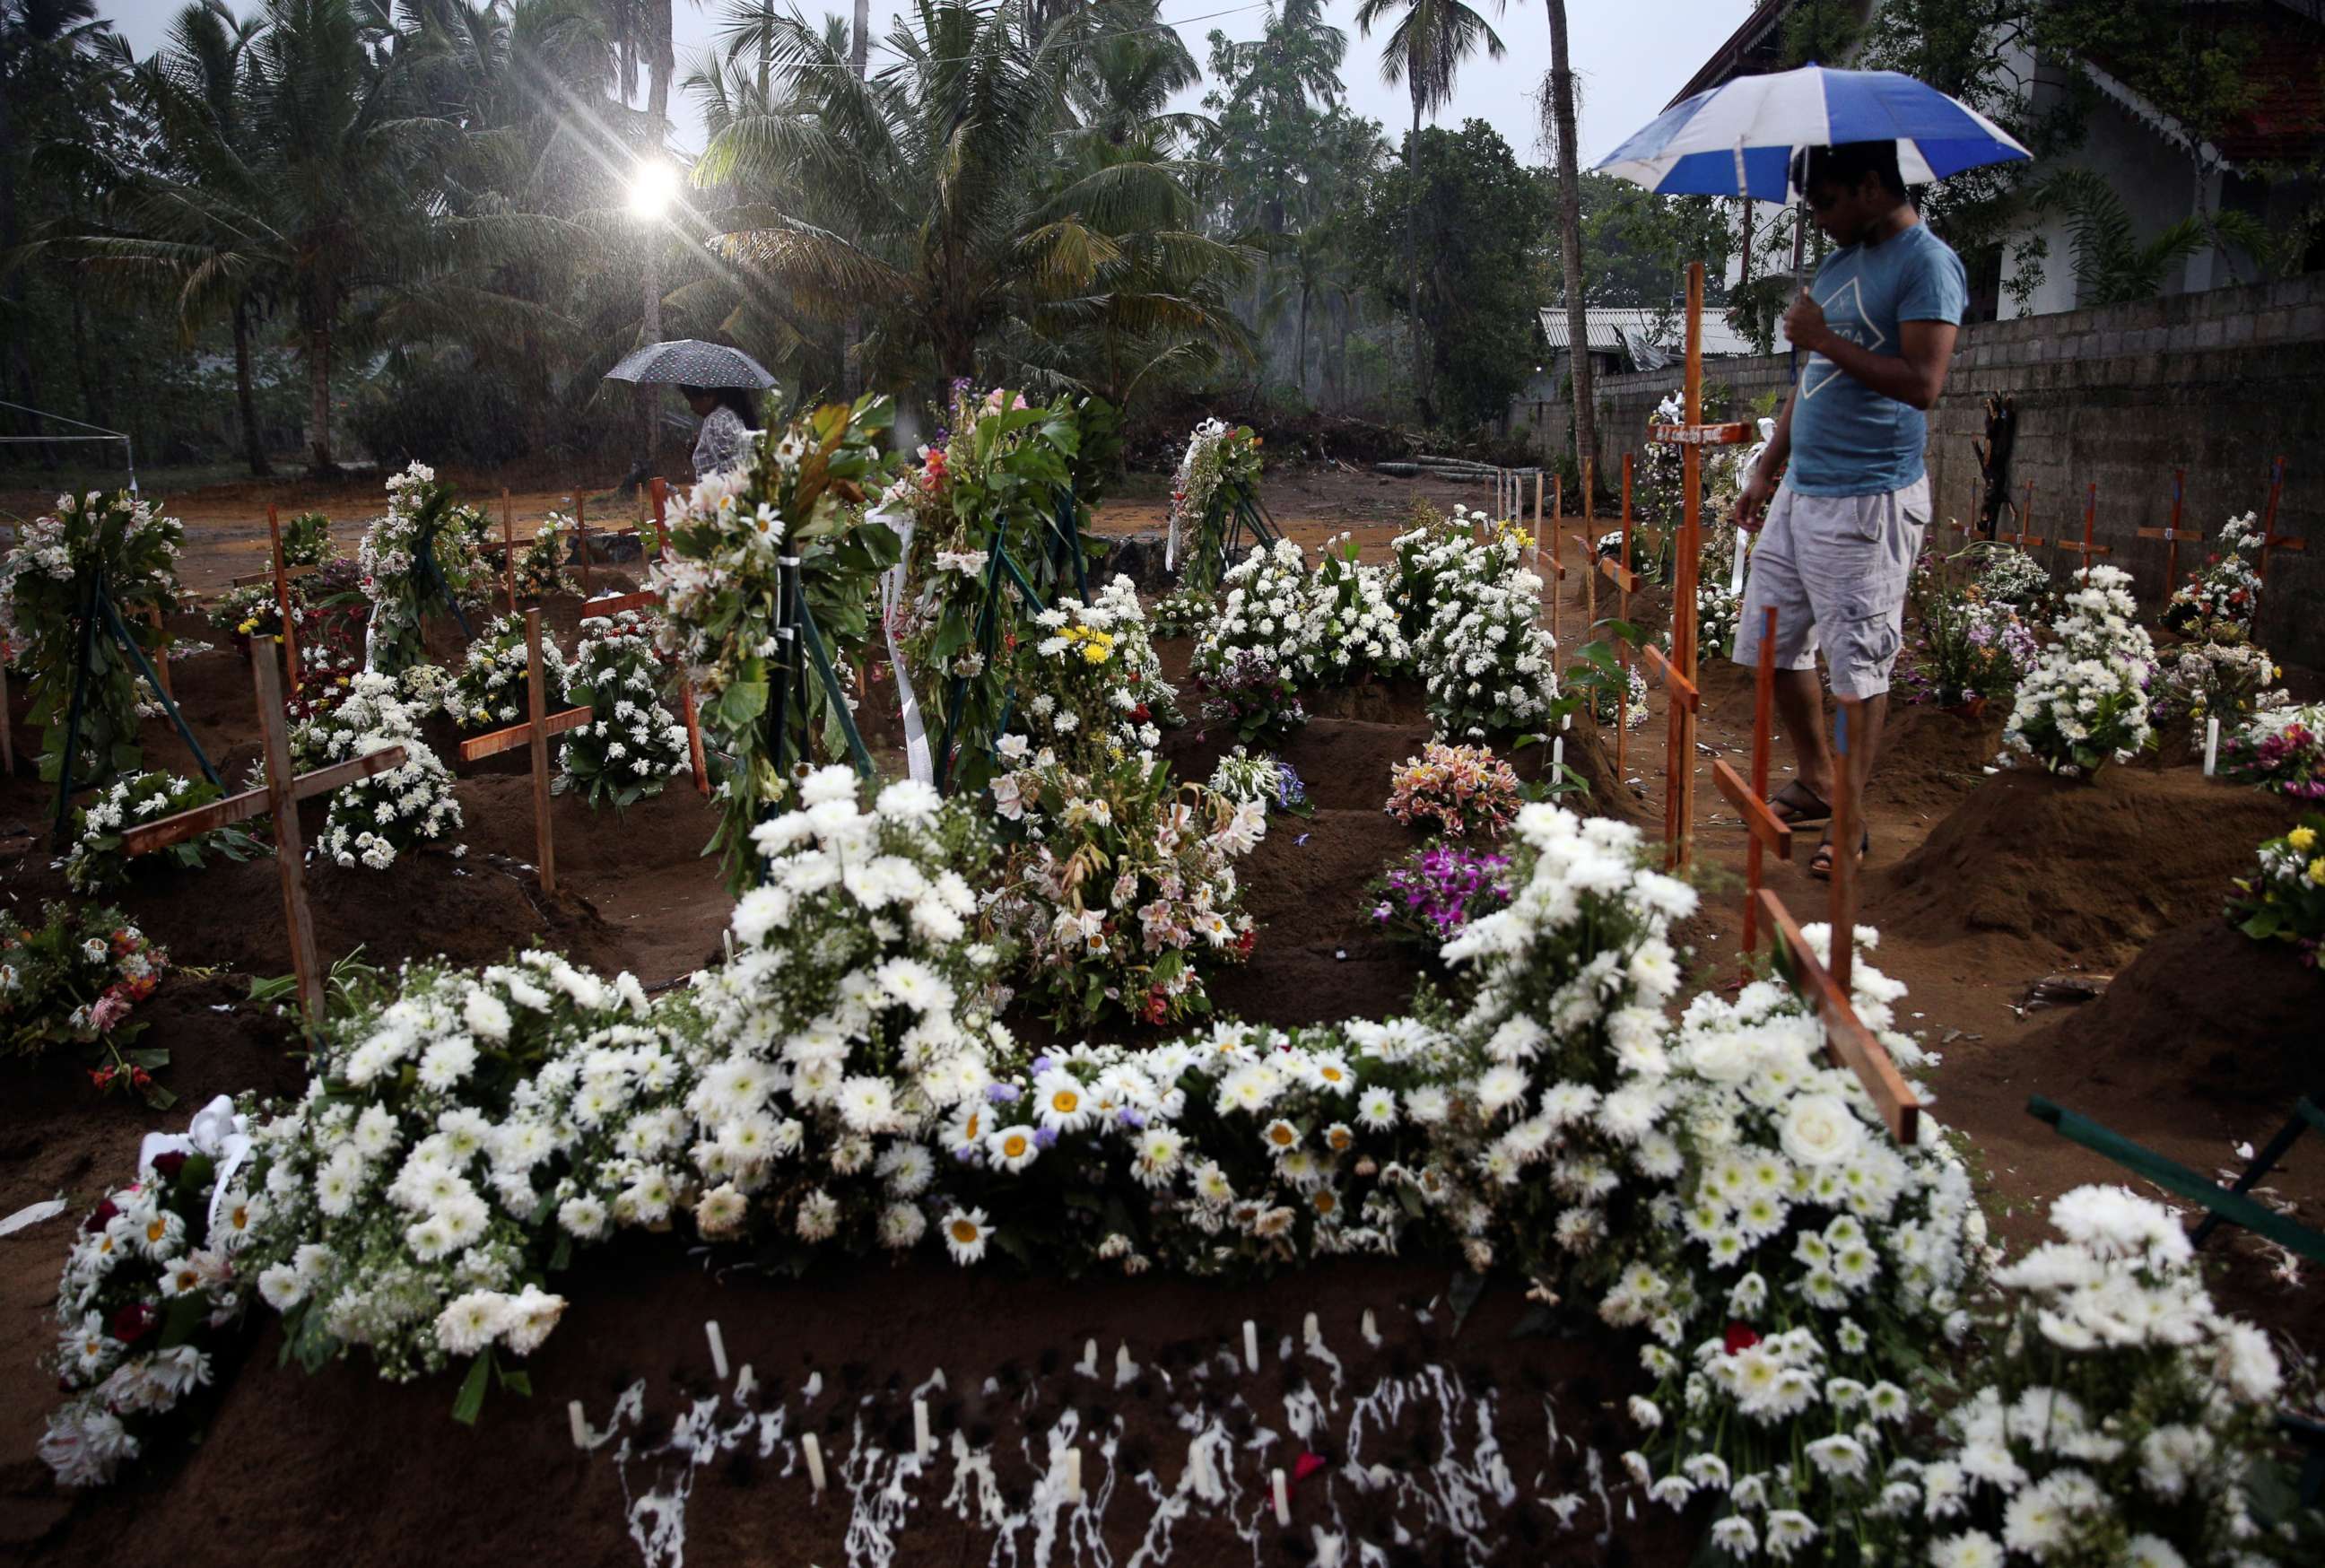 PHOTO: People come to the site of a mass burial to pay their respects to victims of a string of suicide bomb attacks on churches and luxury hotels on Easter Sunday, in Negombo, Sri Lanka, April 25, 2019.